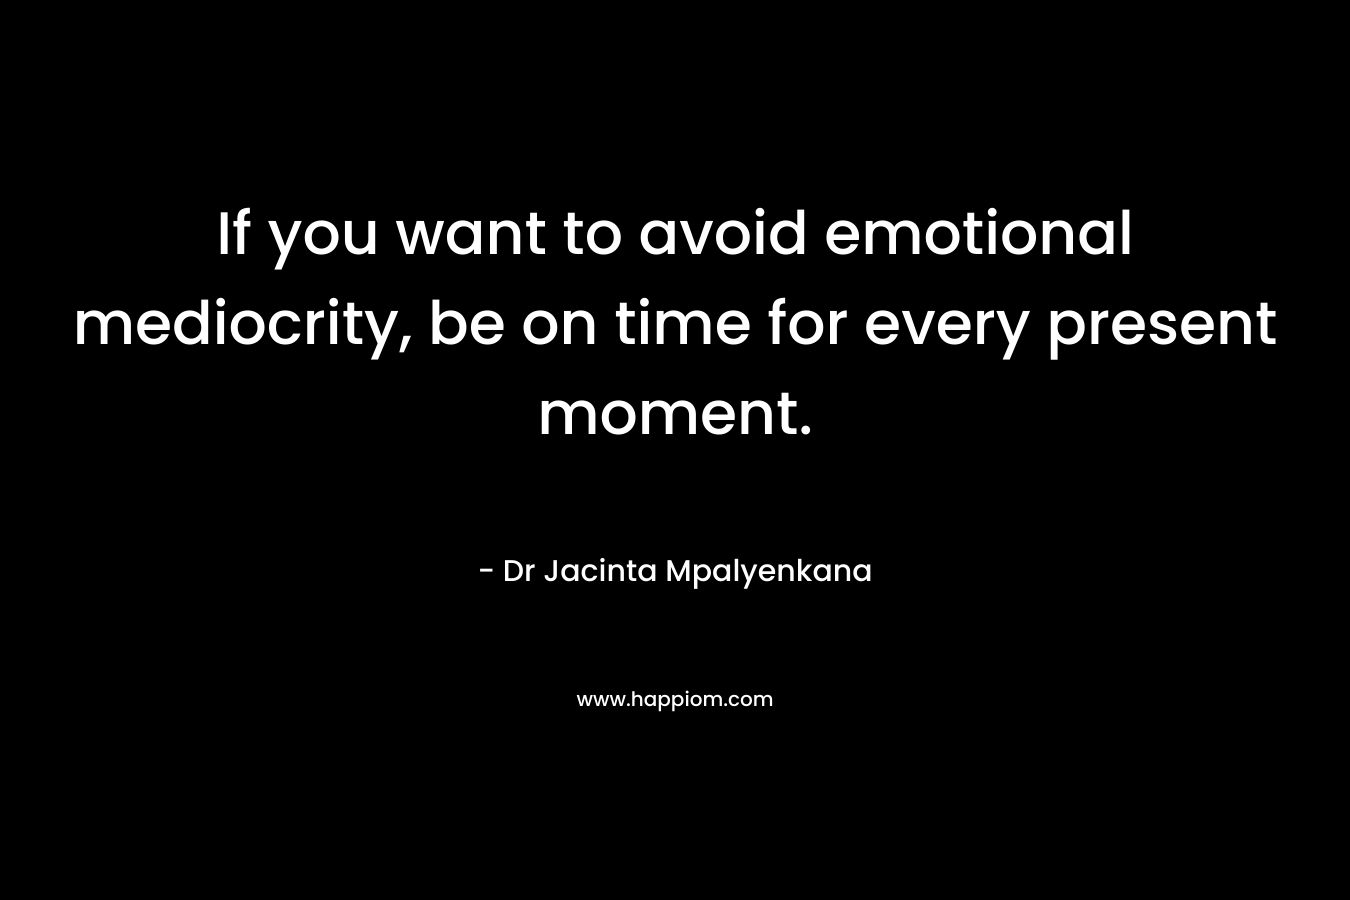 If you want to avoid emotional mediocrity, be on time for every present moment.